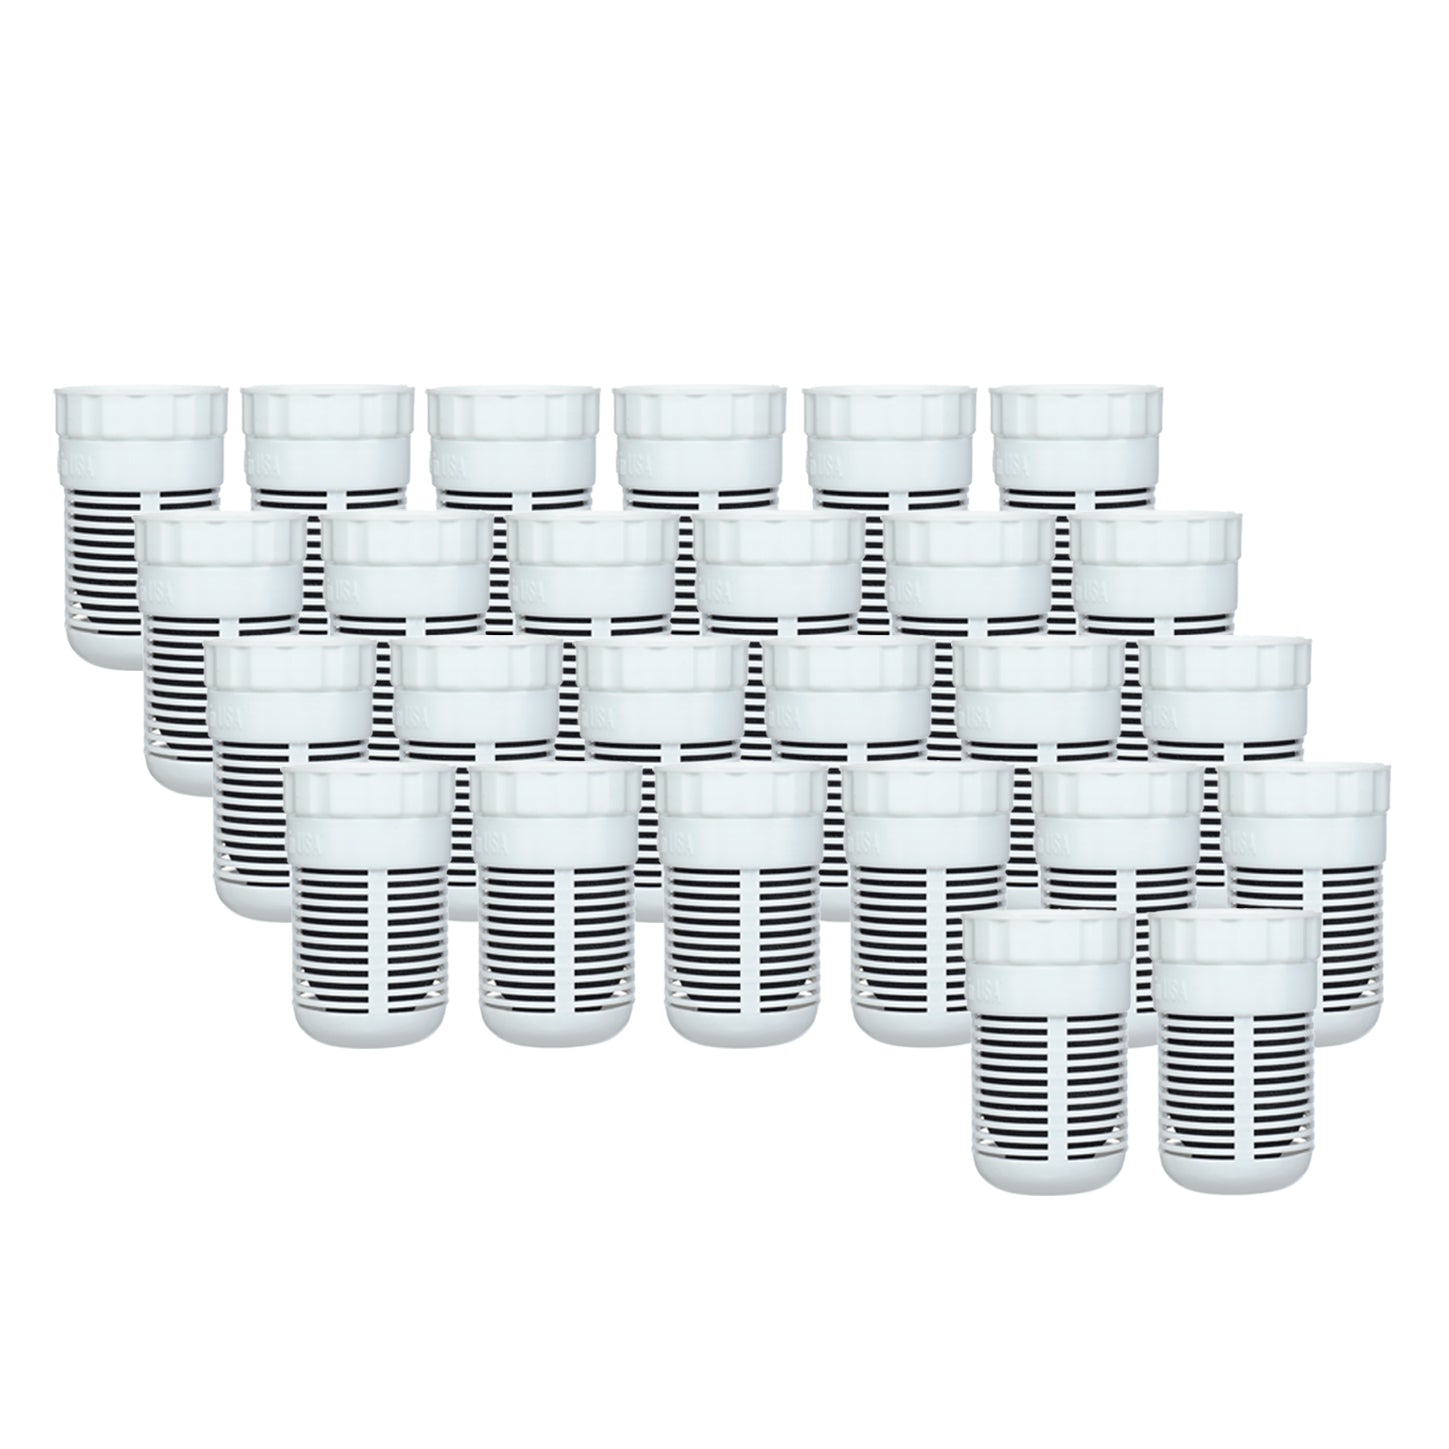 Dual pH2O Pure Water Pitcher Replacement Filter – 13 Pack